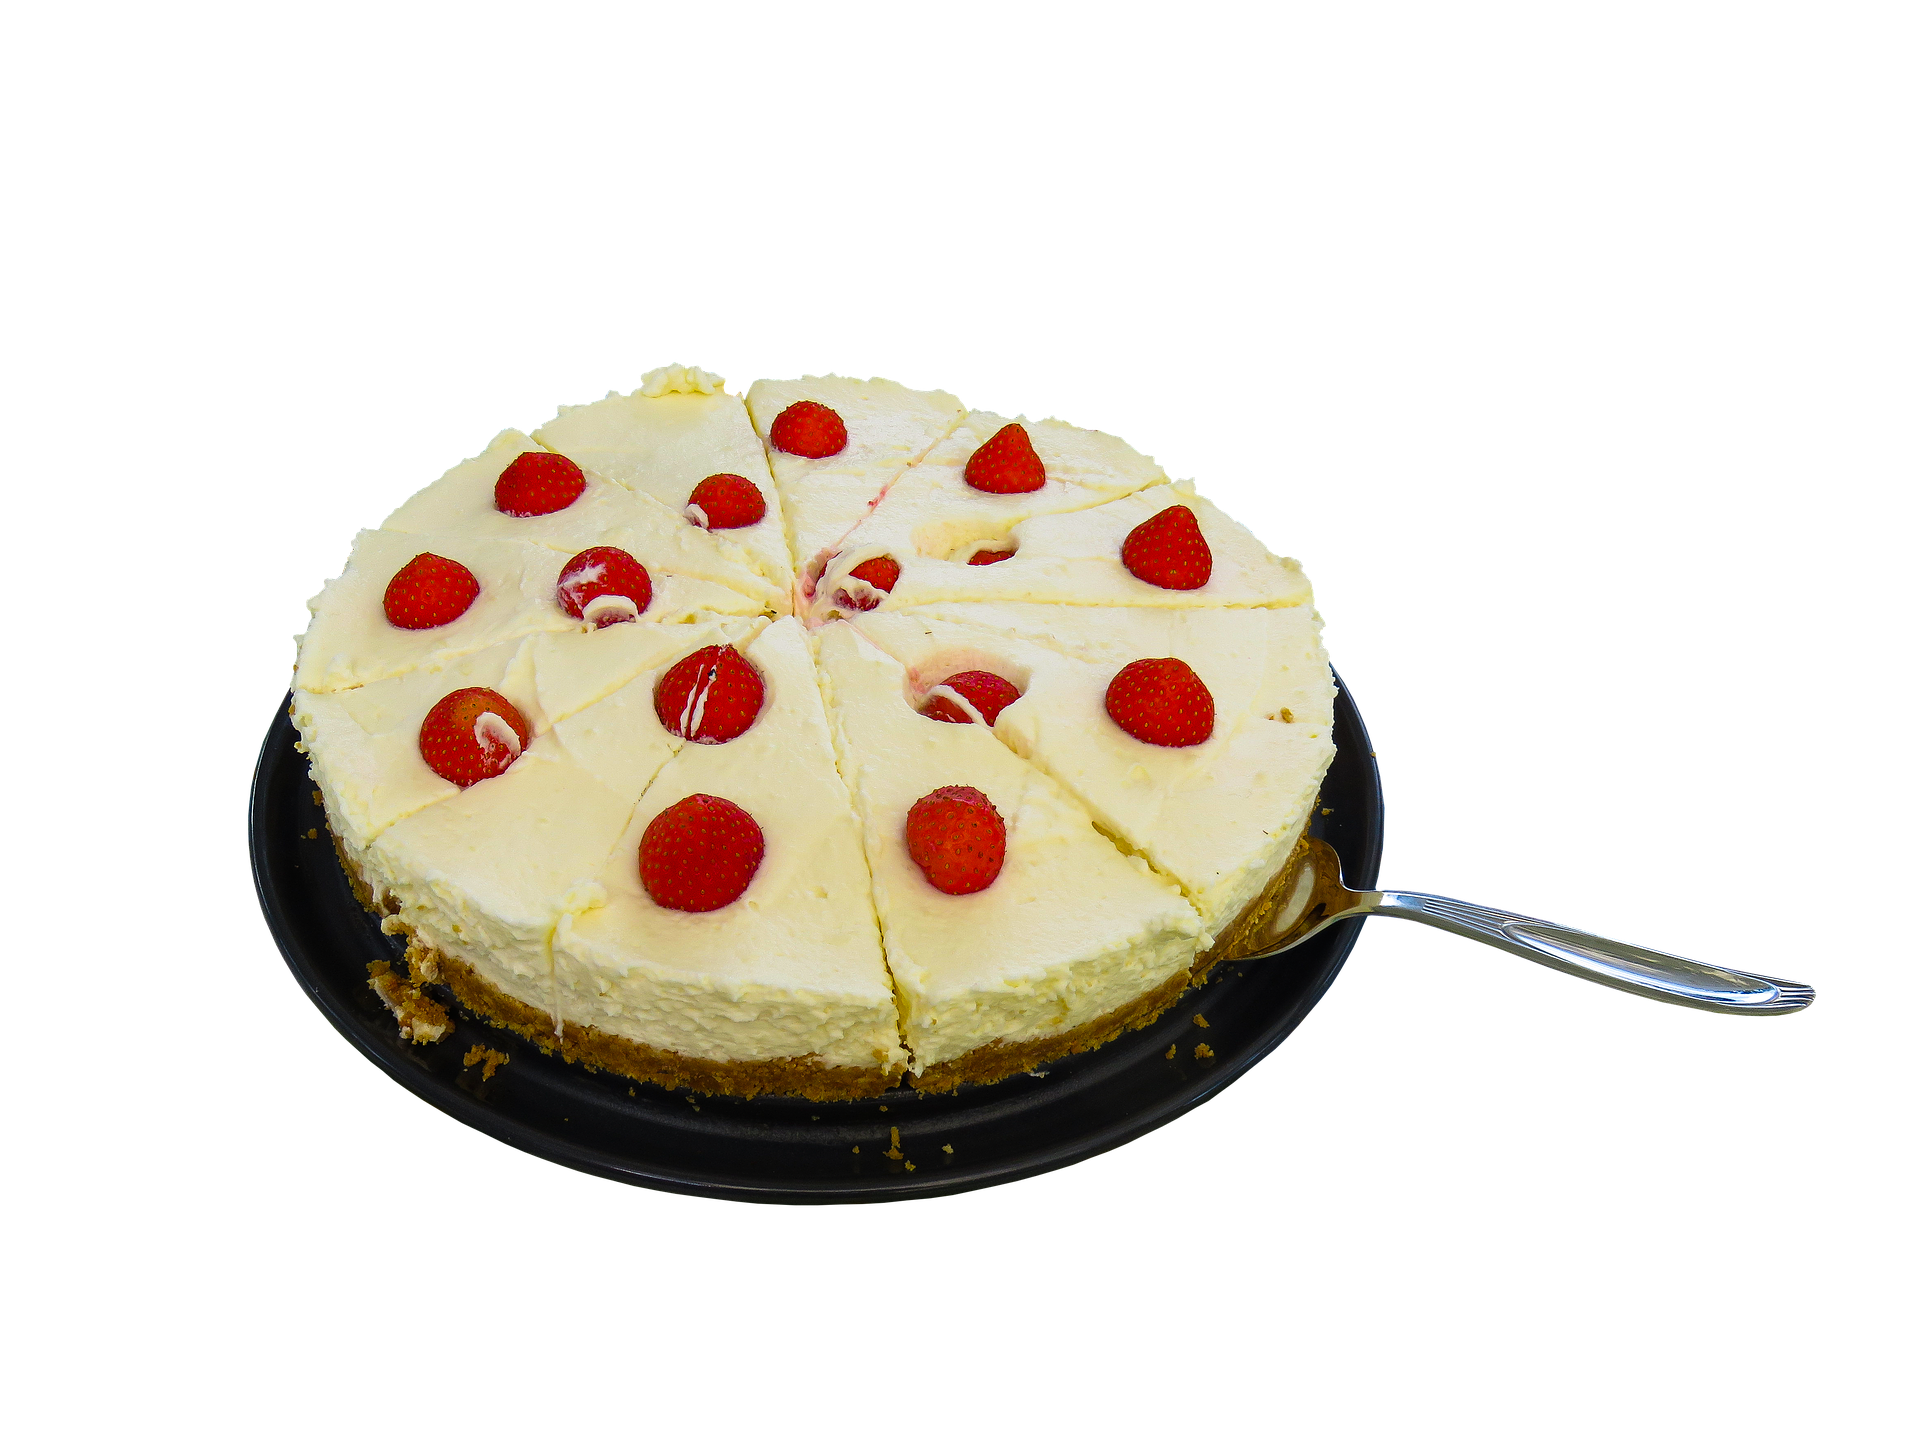 A Cheesecake With Strawberries On Top